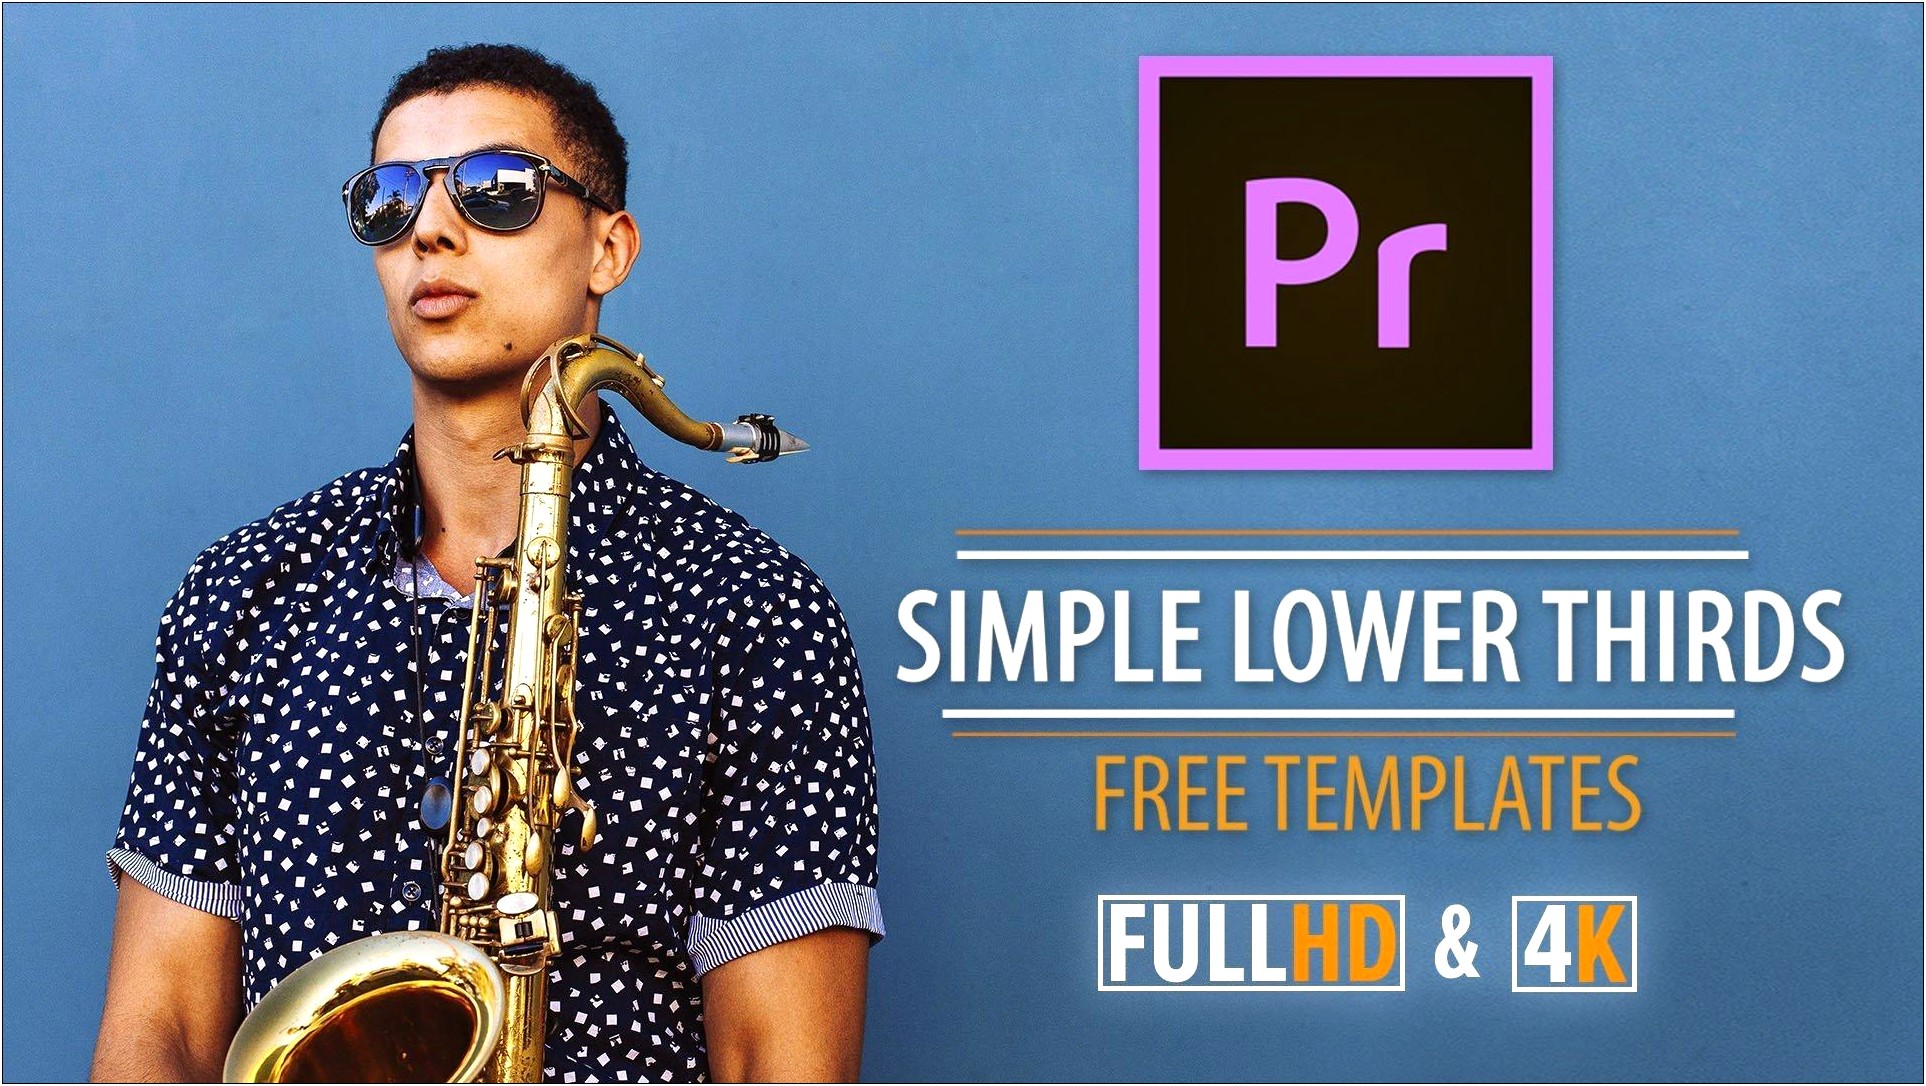 Free Premiere Pro Lower Thirds Templates Resume Example Gallery